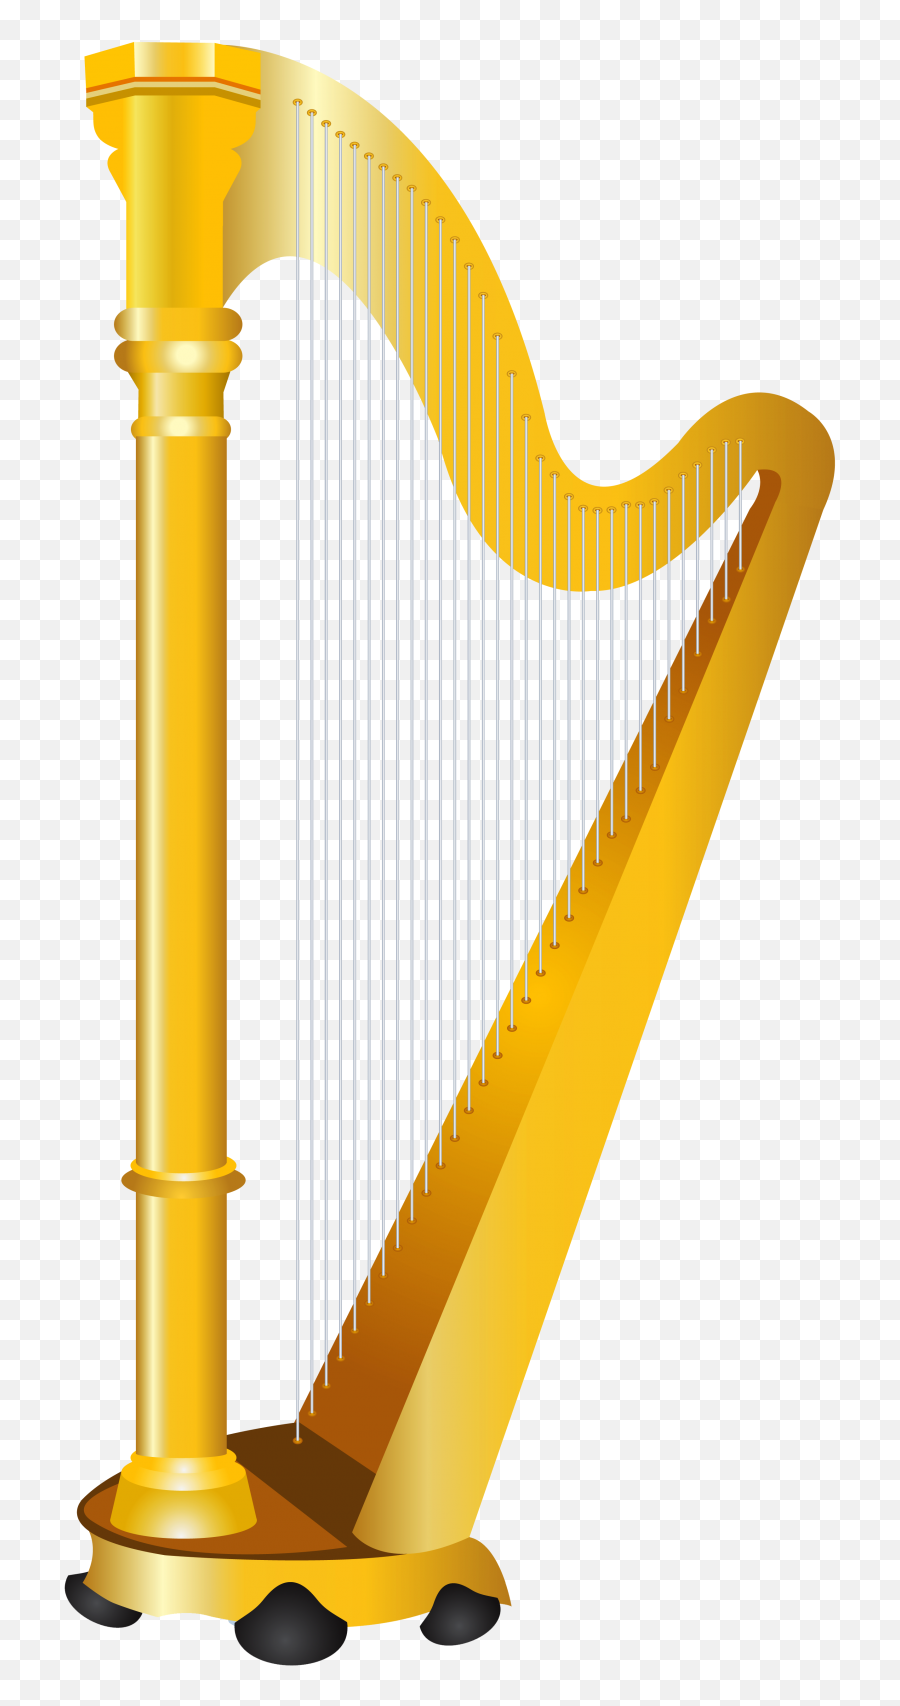 Harp Png Image - Golden Harp Jack And The Beanstalk,Harp Png